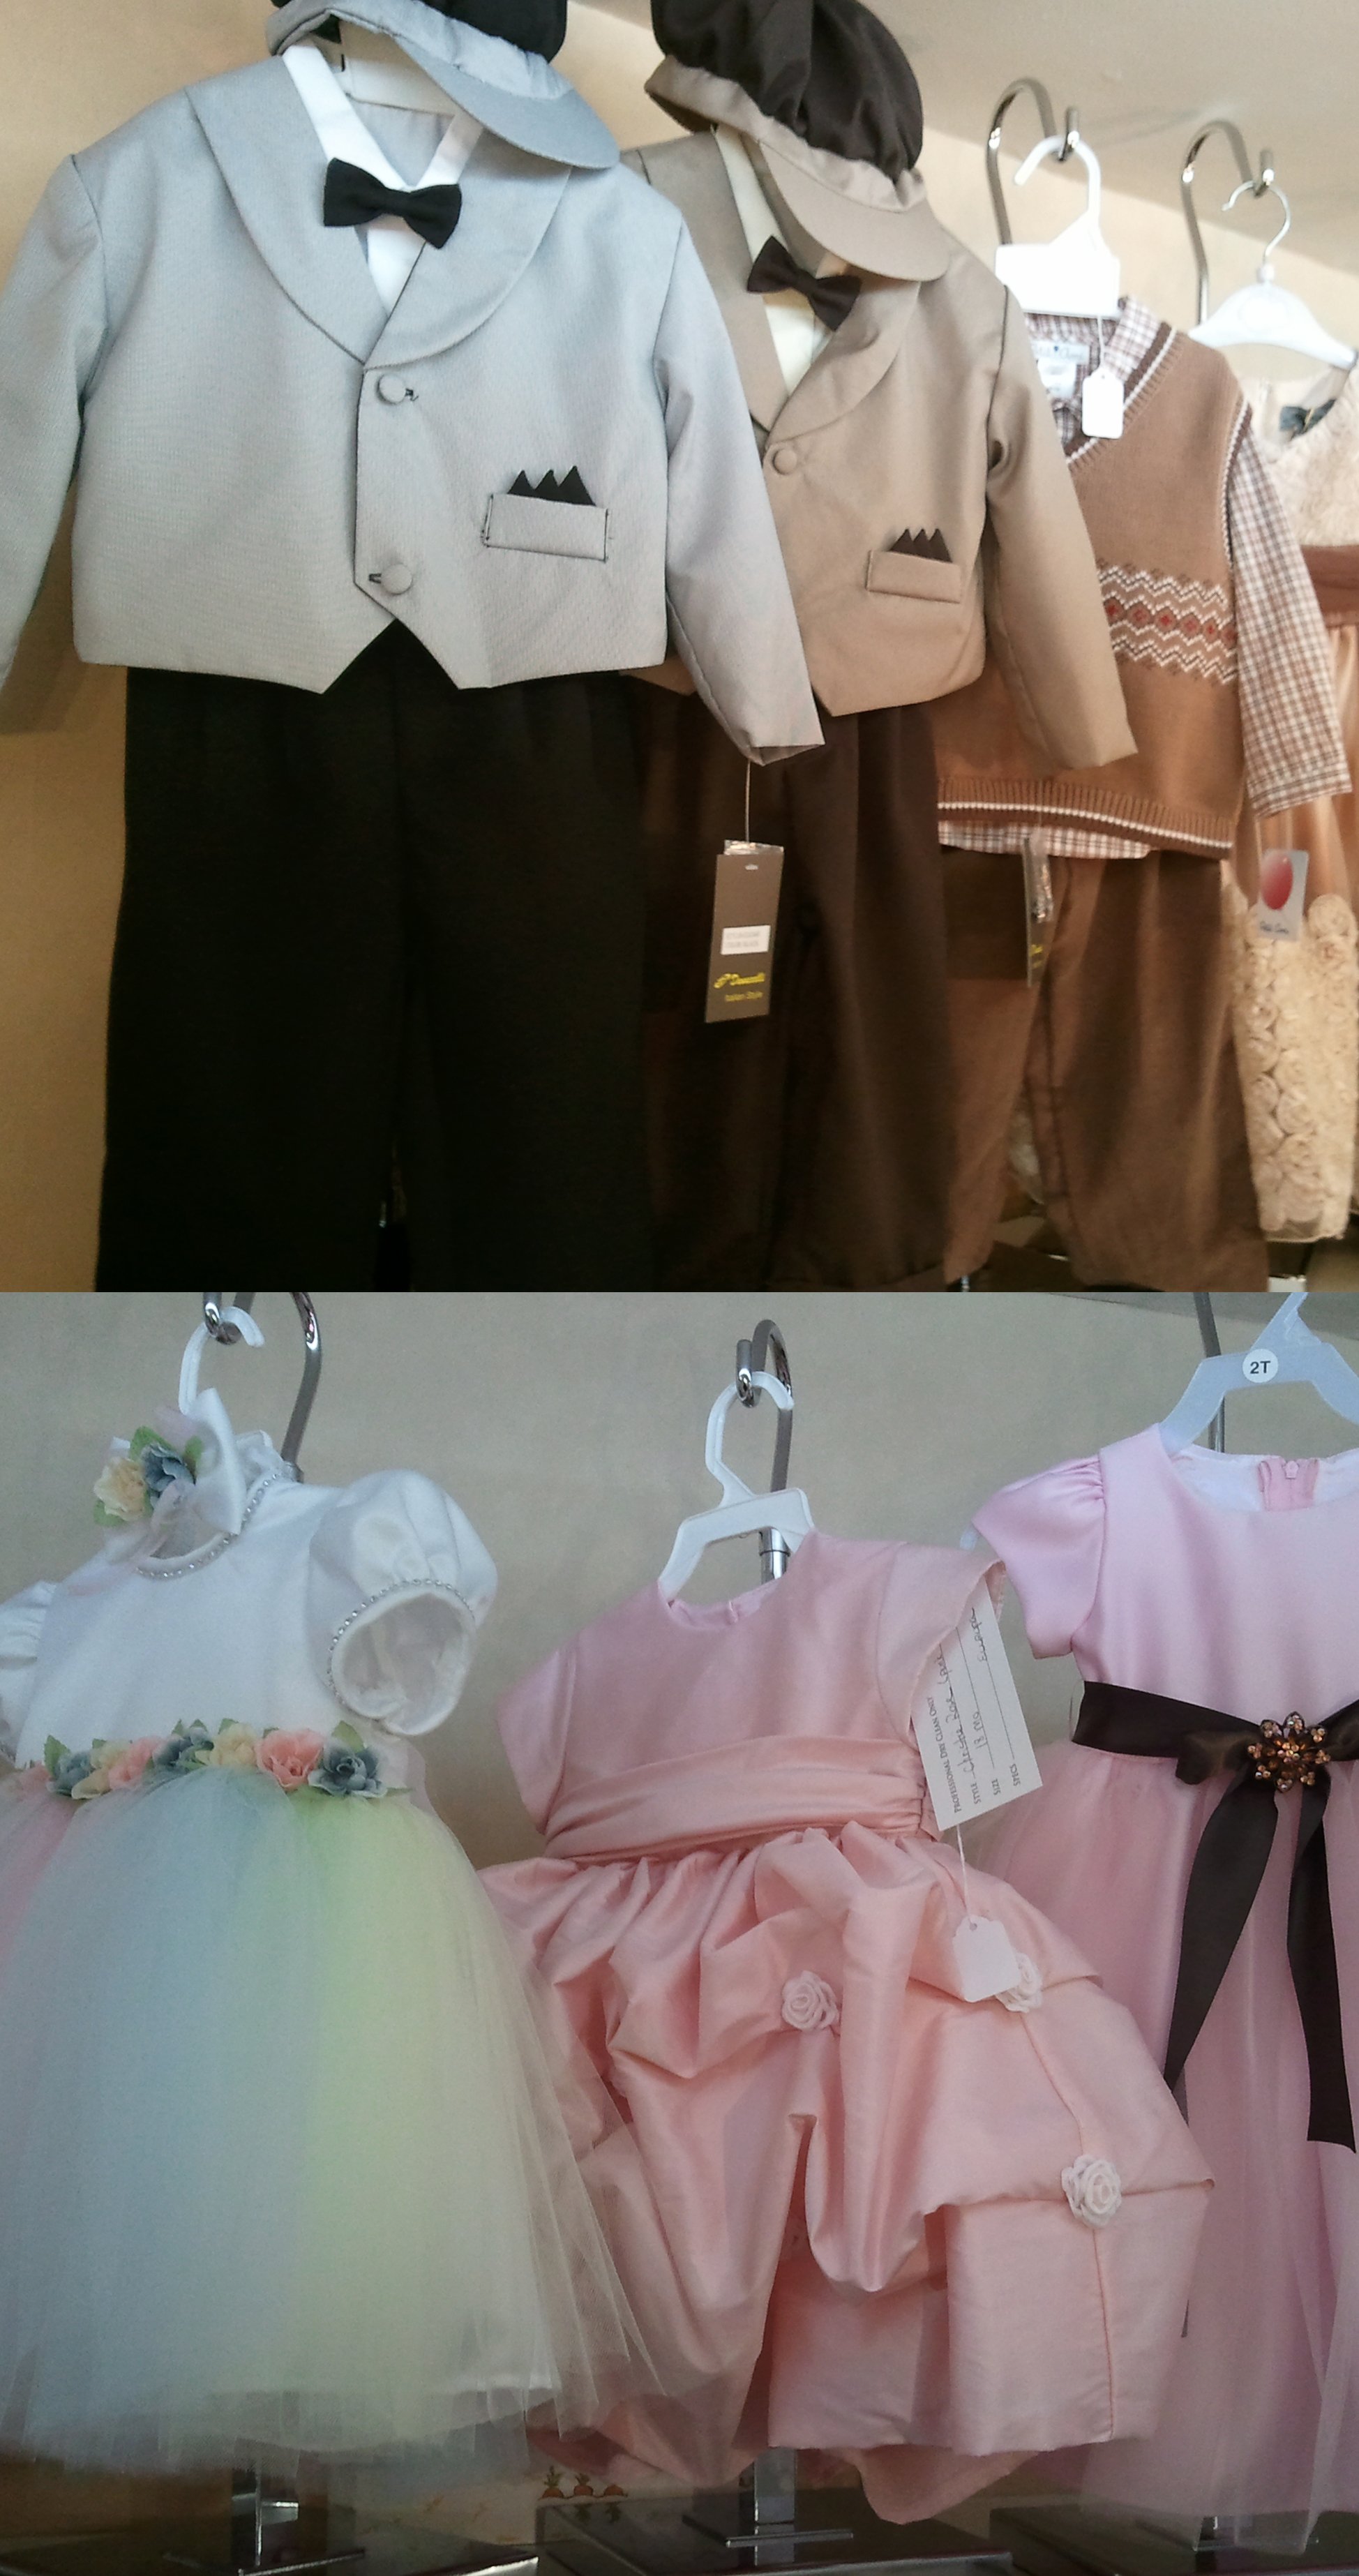 Europa specializes in communion gowns but also stocks christening outfits, suits, party dresses, coats, baby layettes, shoes, bibs, blankets, hats, jewelry, and accessories.